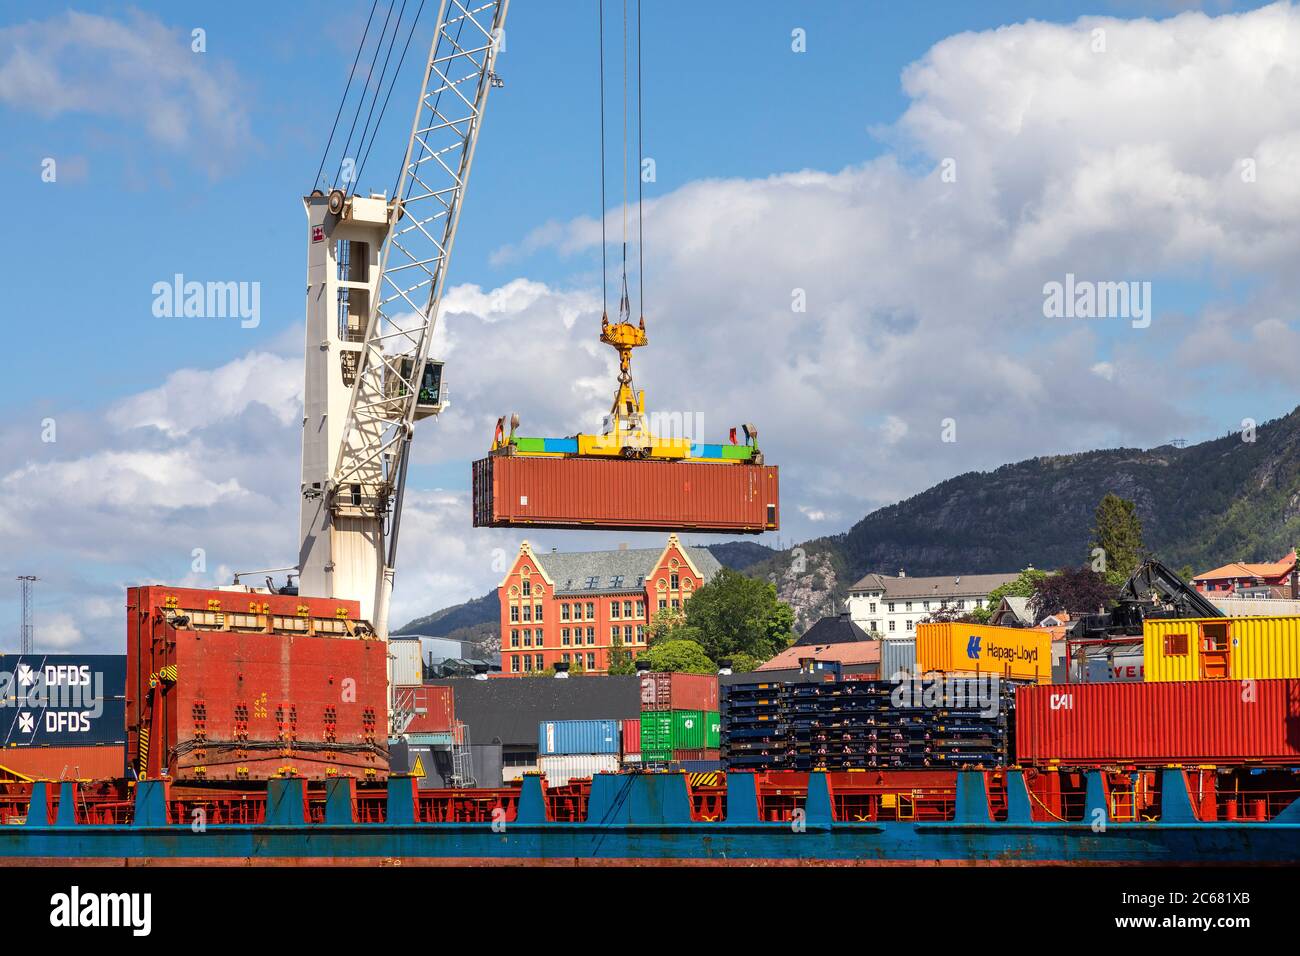 Container loading operation at Frieleneskaien quay, in the port of Bergen, Norway. Stock Photo